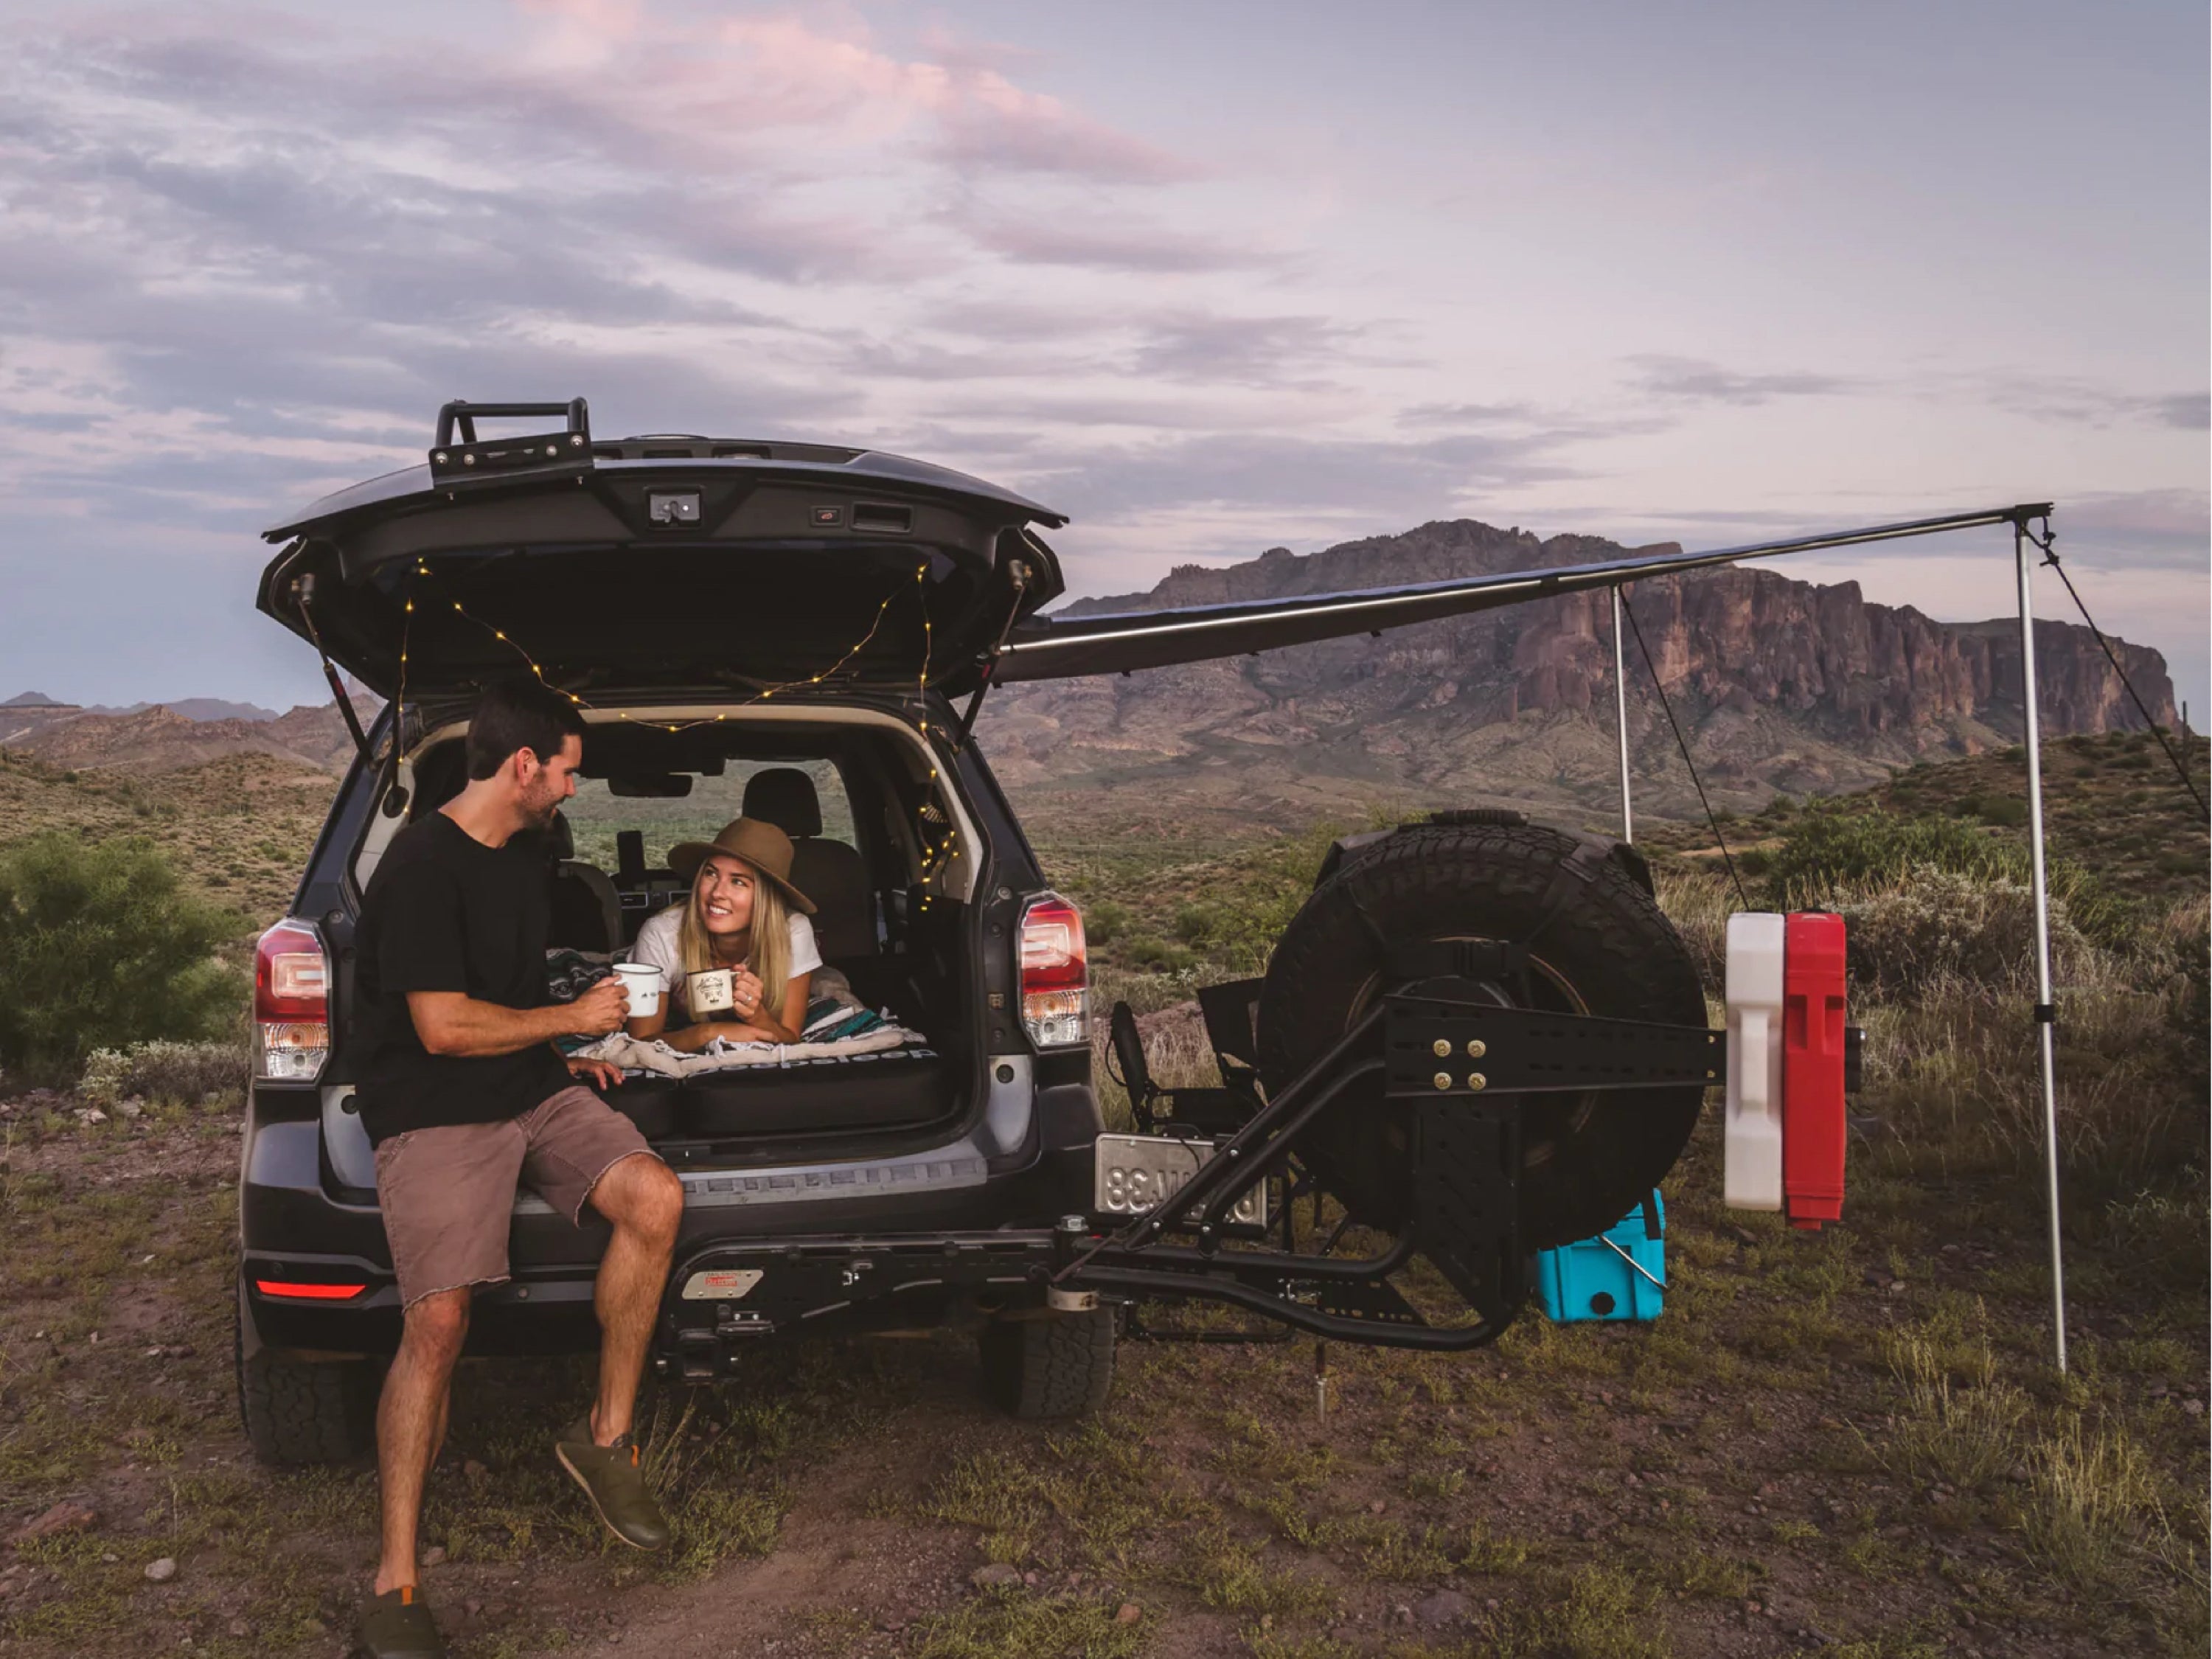 Male and female holding mugs while car camping on foam mattresses in the back of overland SUV in the mountainous desert at dusk